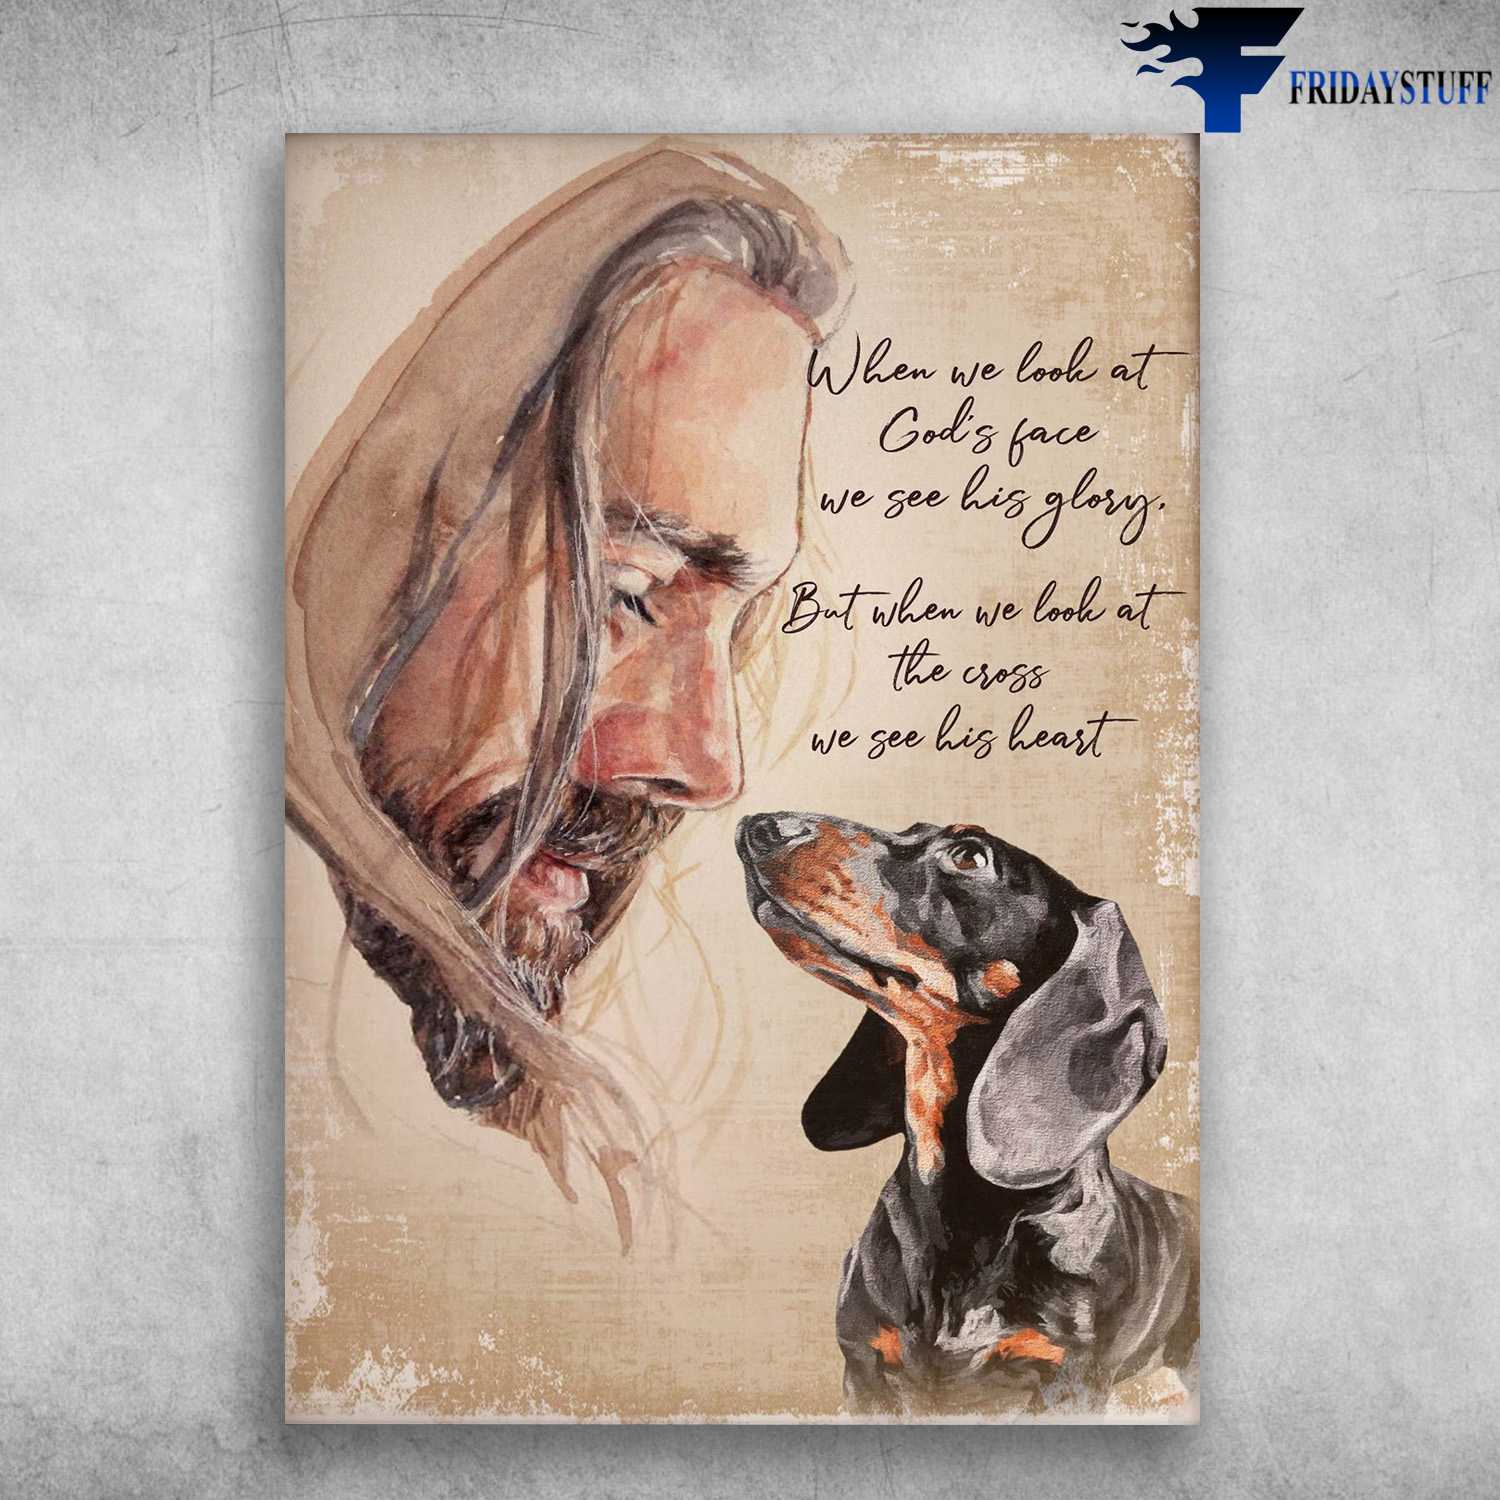 Dachshund Jesus - When We Look At God's Face, We See His Glory, But When We Look At The Cross, We See His Heart